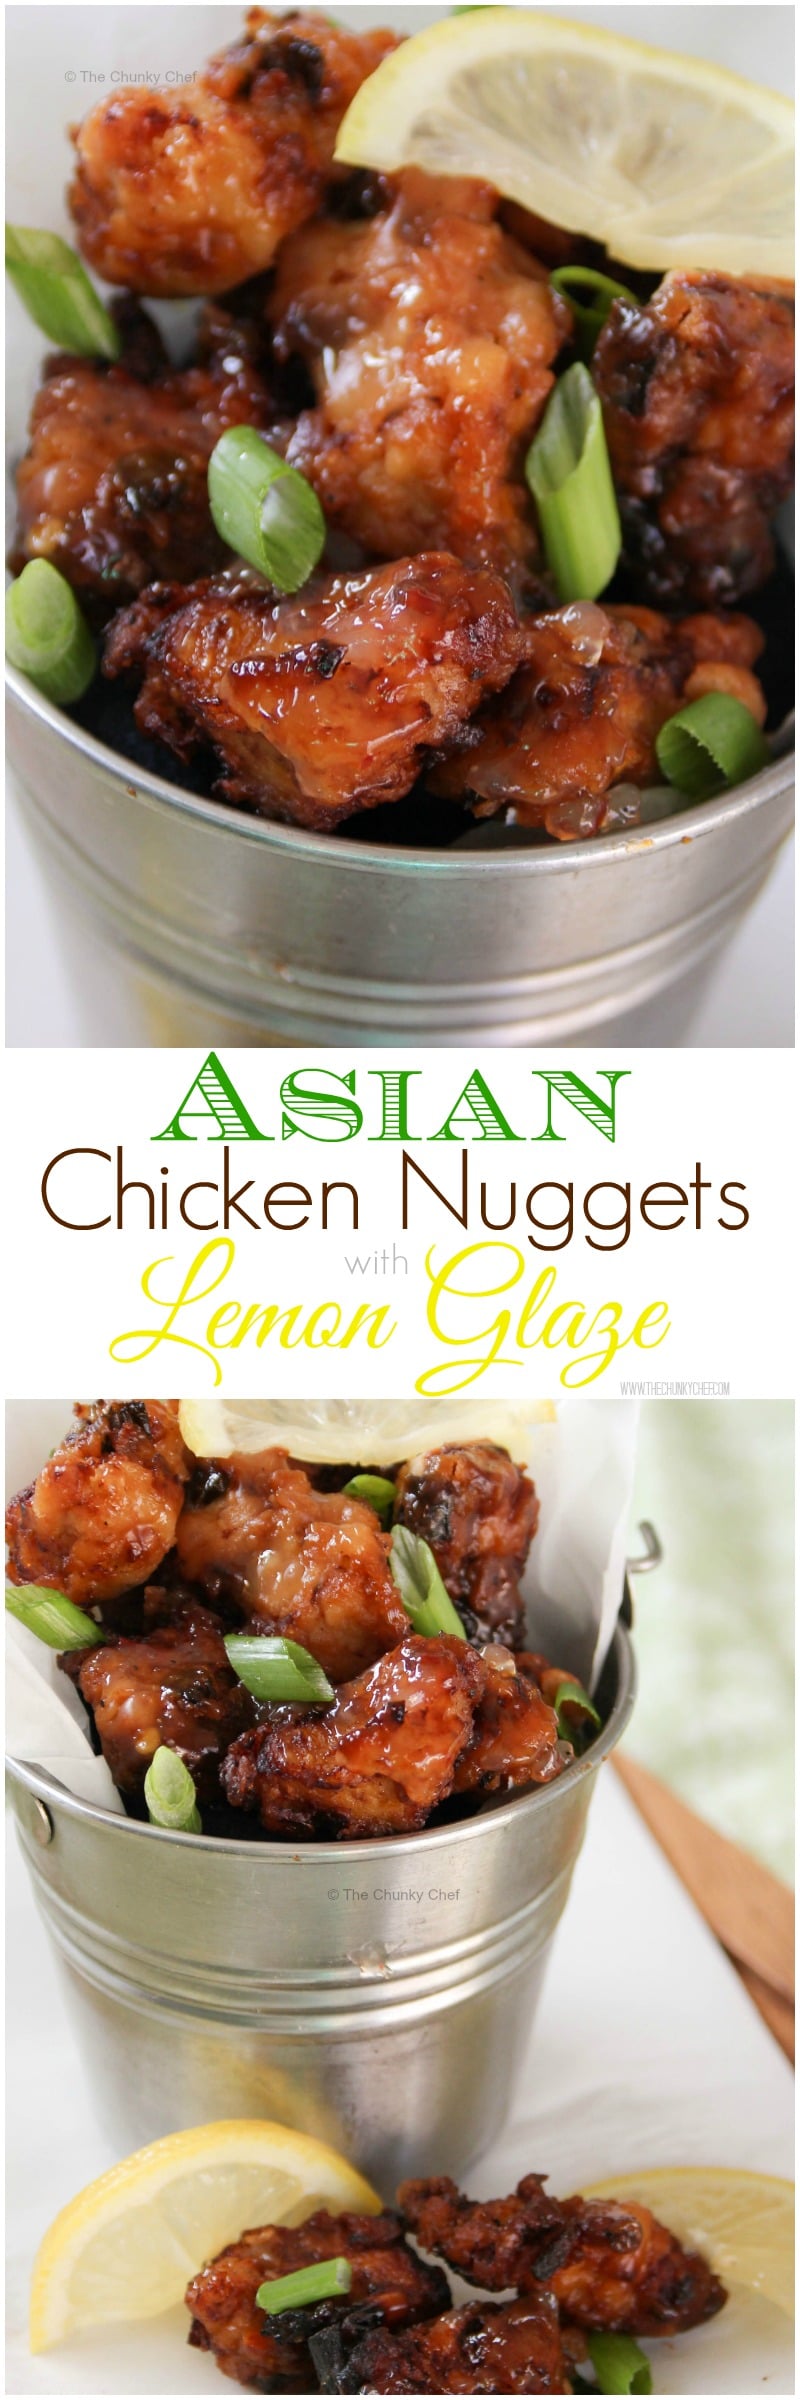 These chicken nuggets are fantastic! A twist on the classic with a glaze that will amaze you... try them tonight!